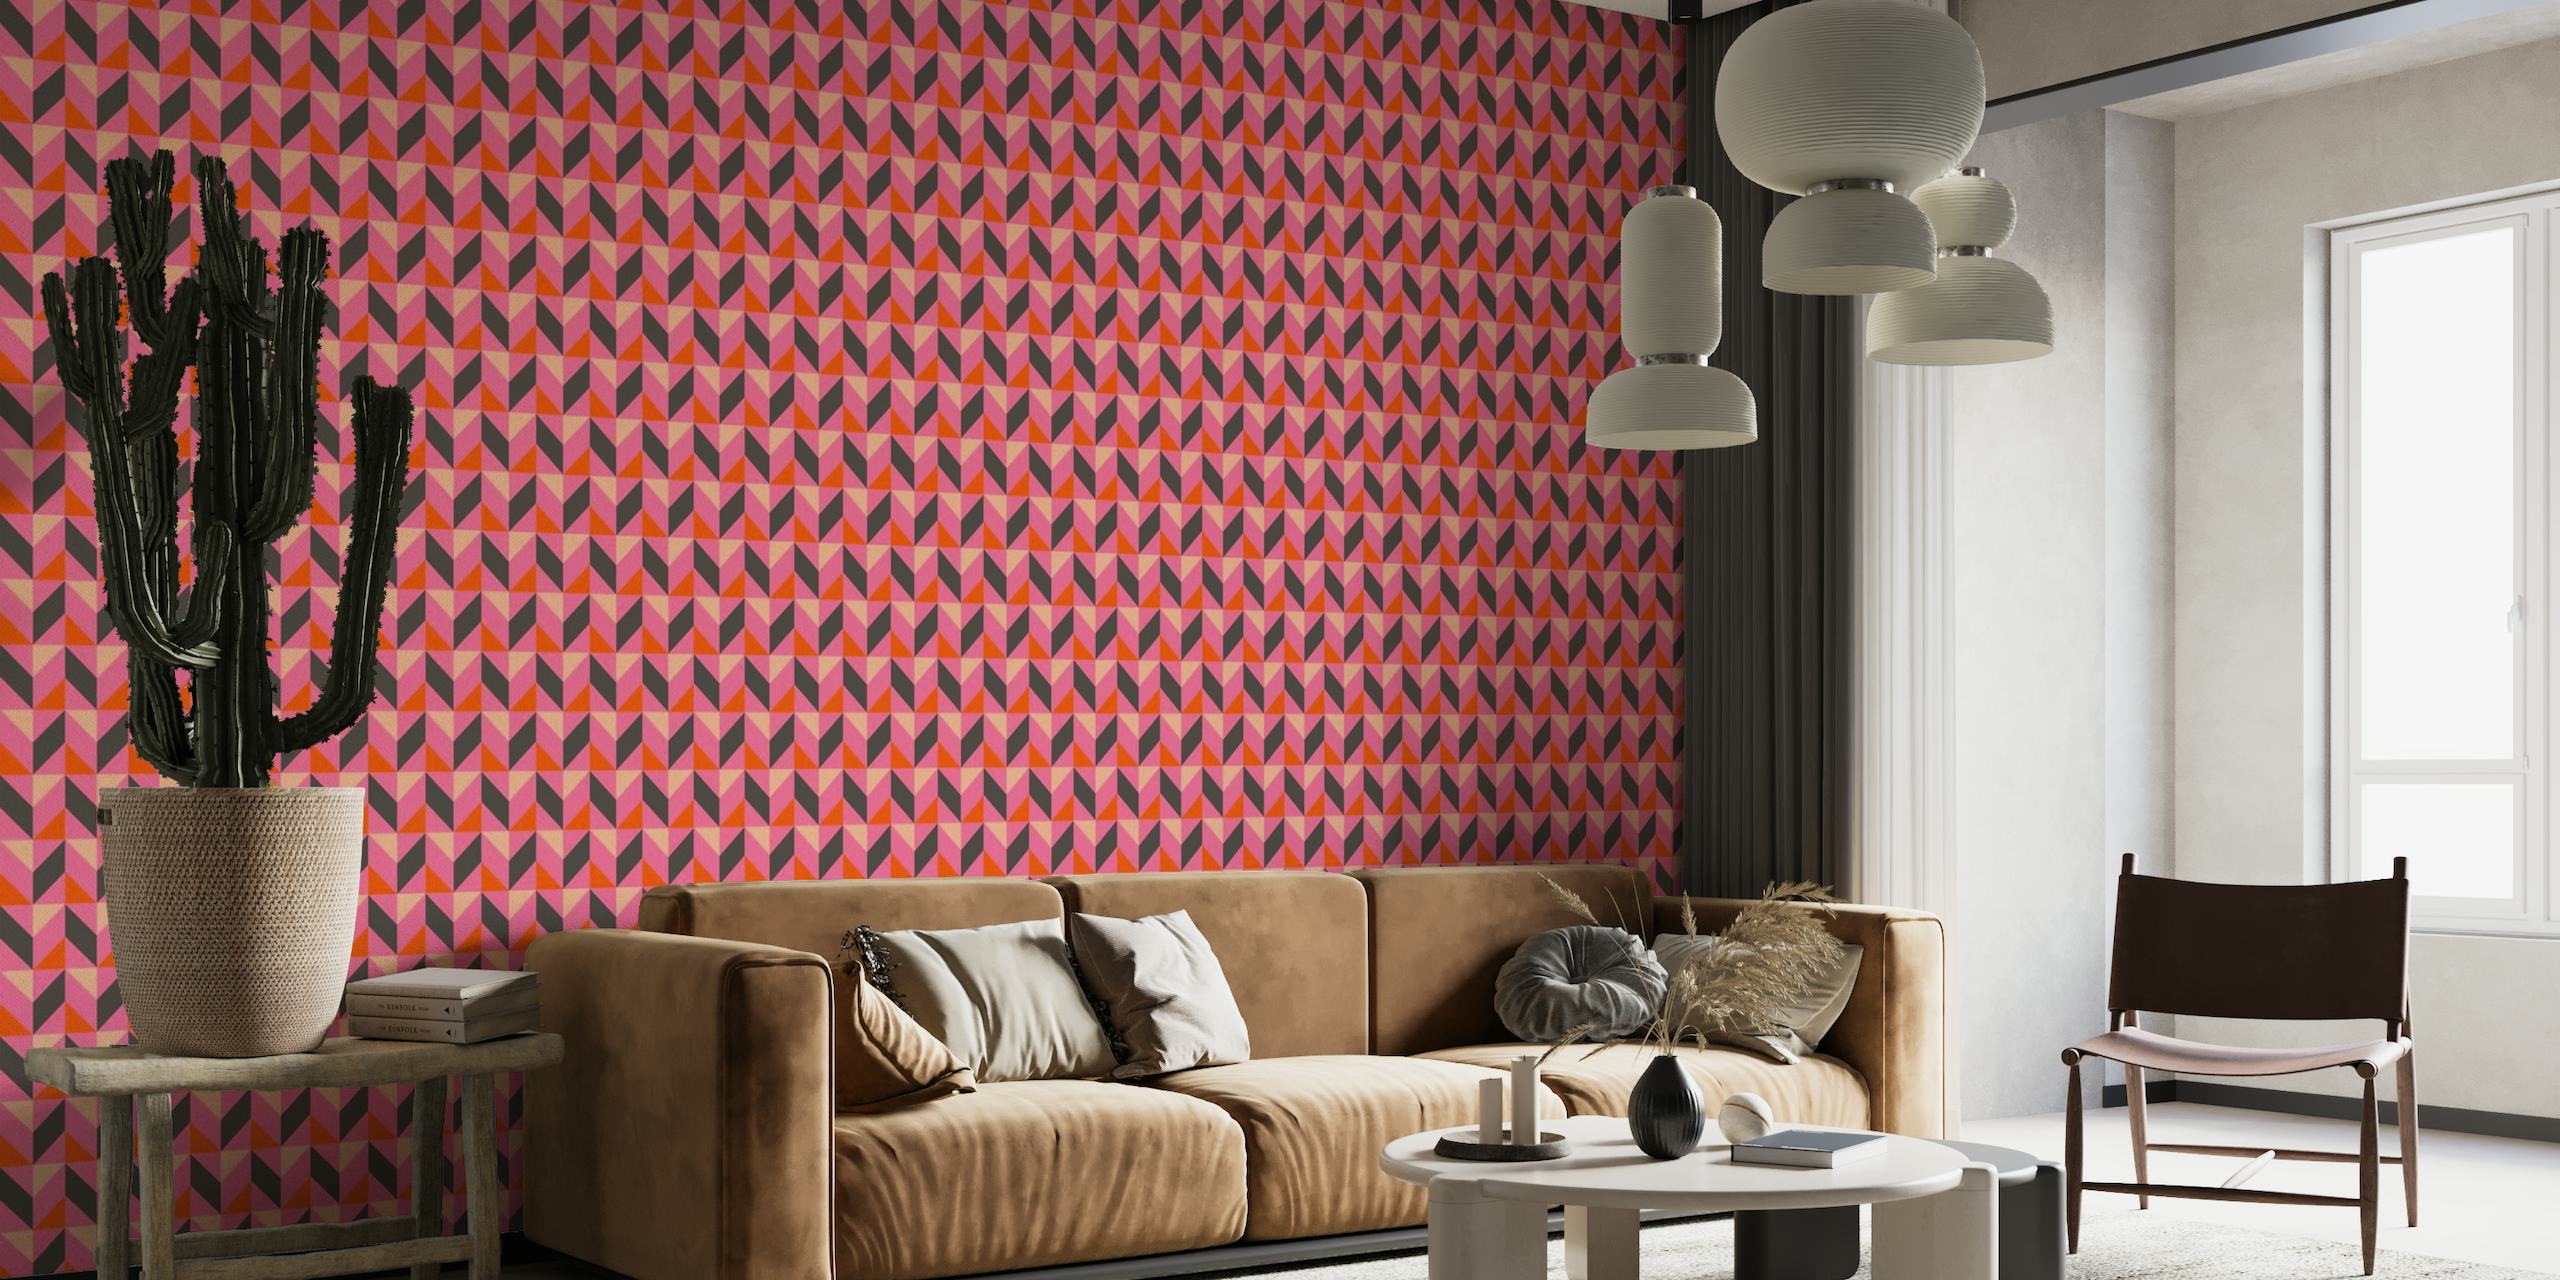 Bold Geometric Pattern in Hot Pink and Orange ταπετσαρία